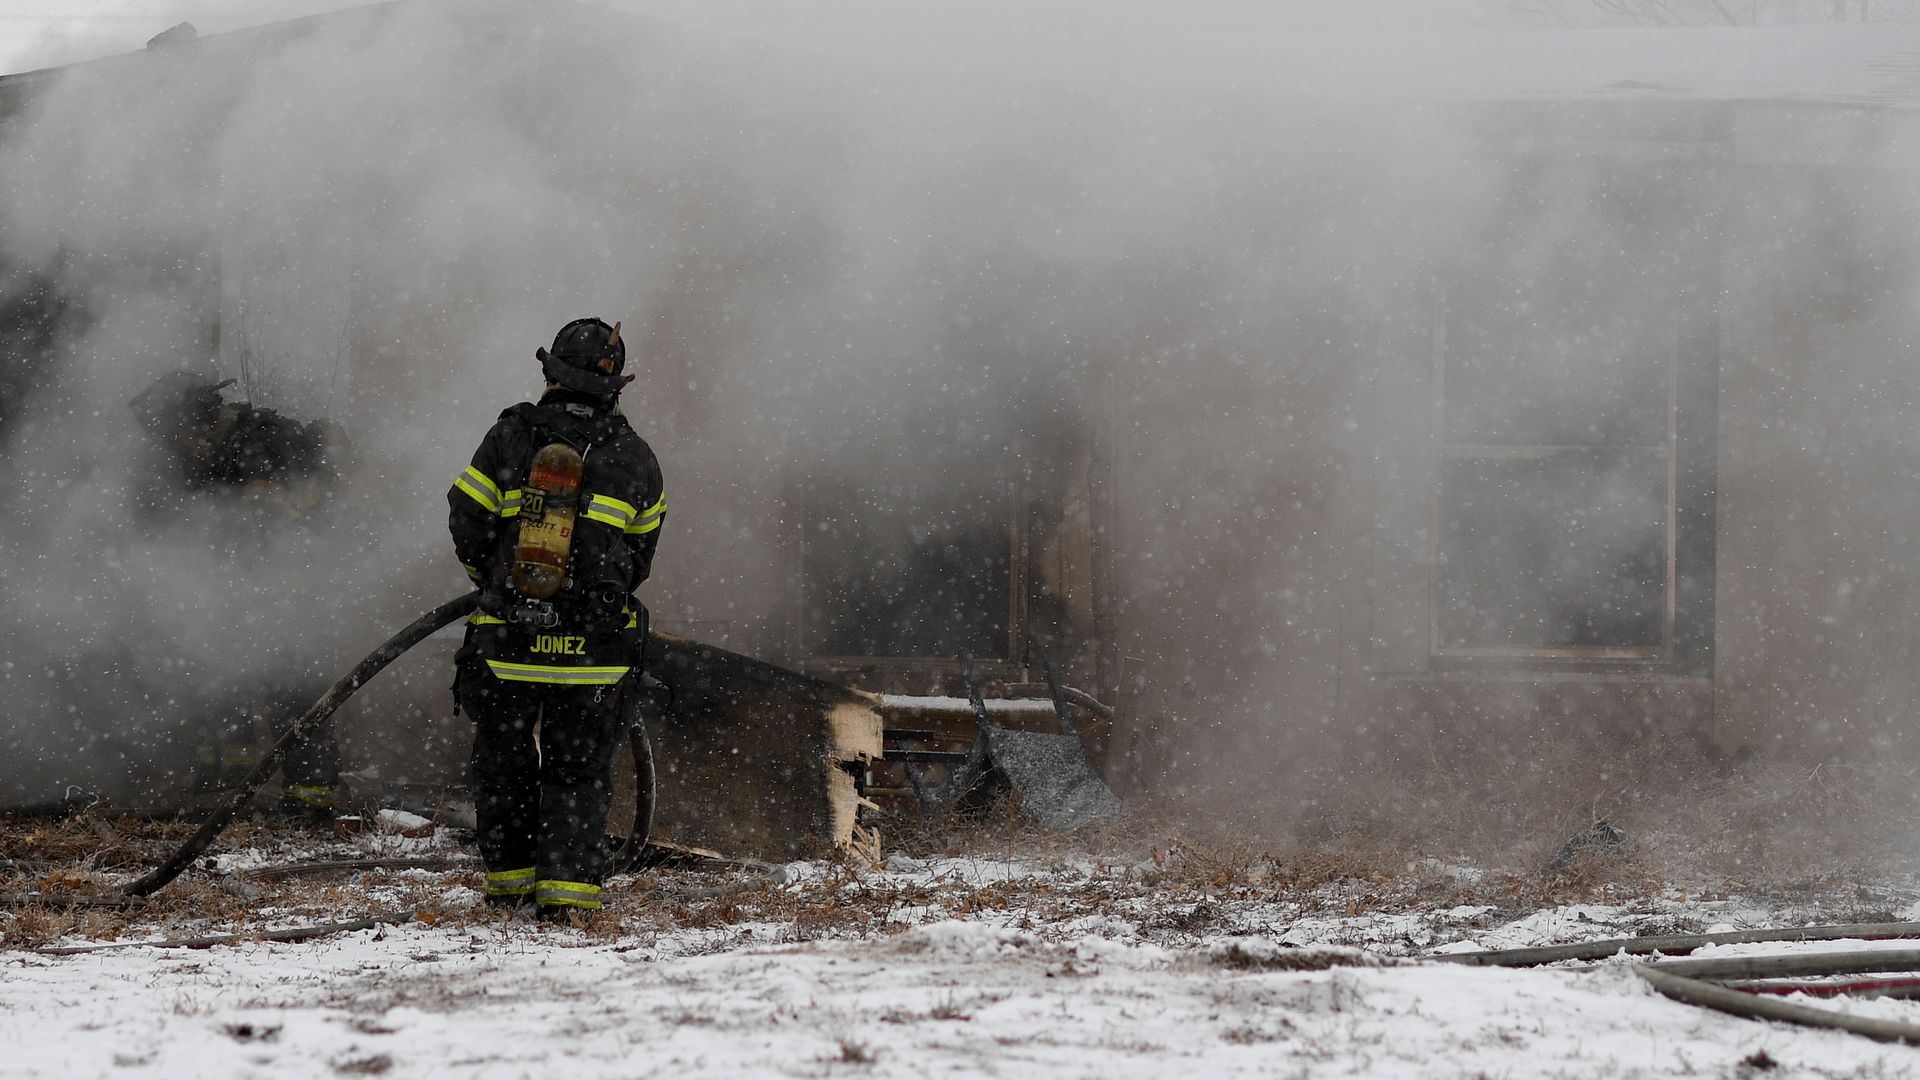 Denver Fire crews work in snow and cold to put out a house fire at the 3100 block of S. Grove St. on February 3, 2020 in Denver